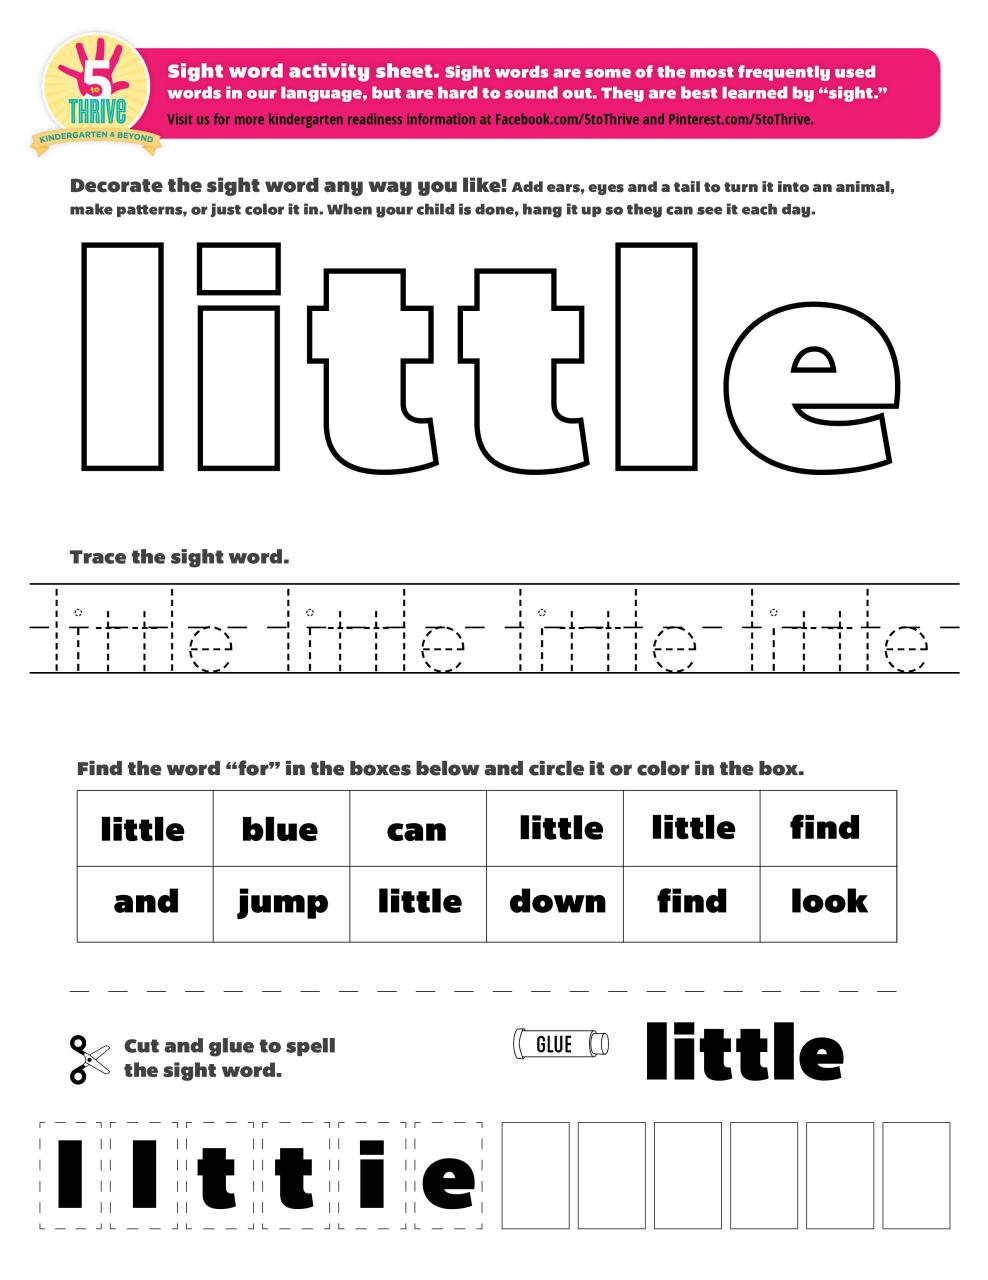 The sight word this week is "little". Sight words are some of the most